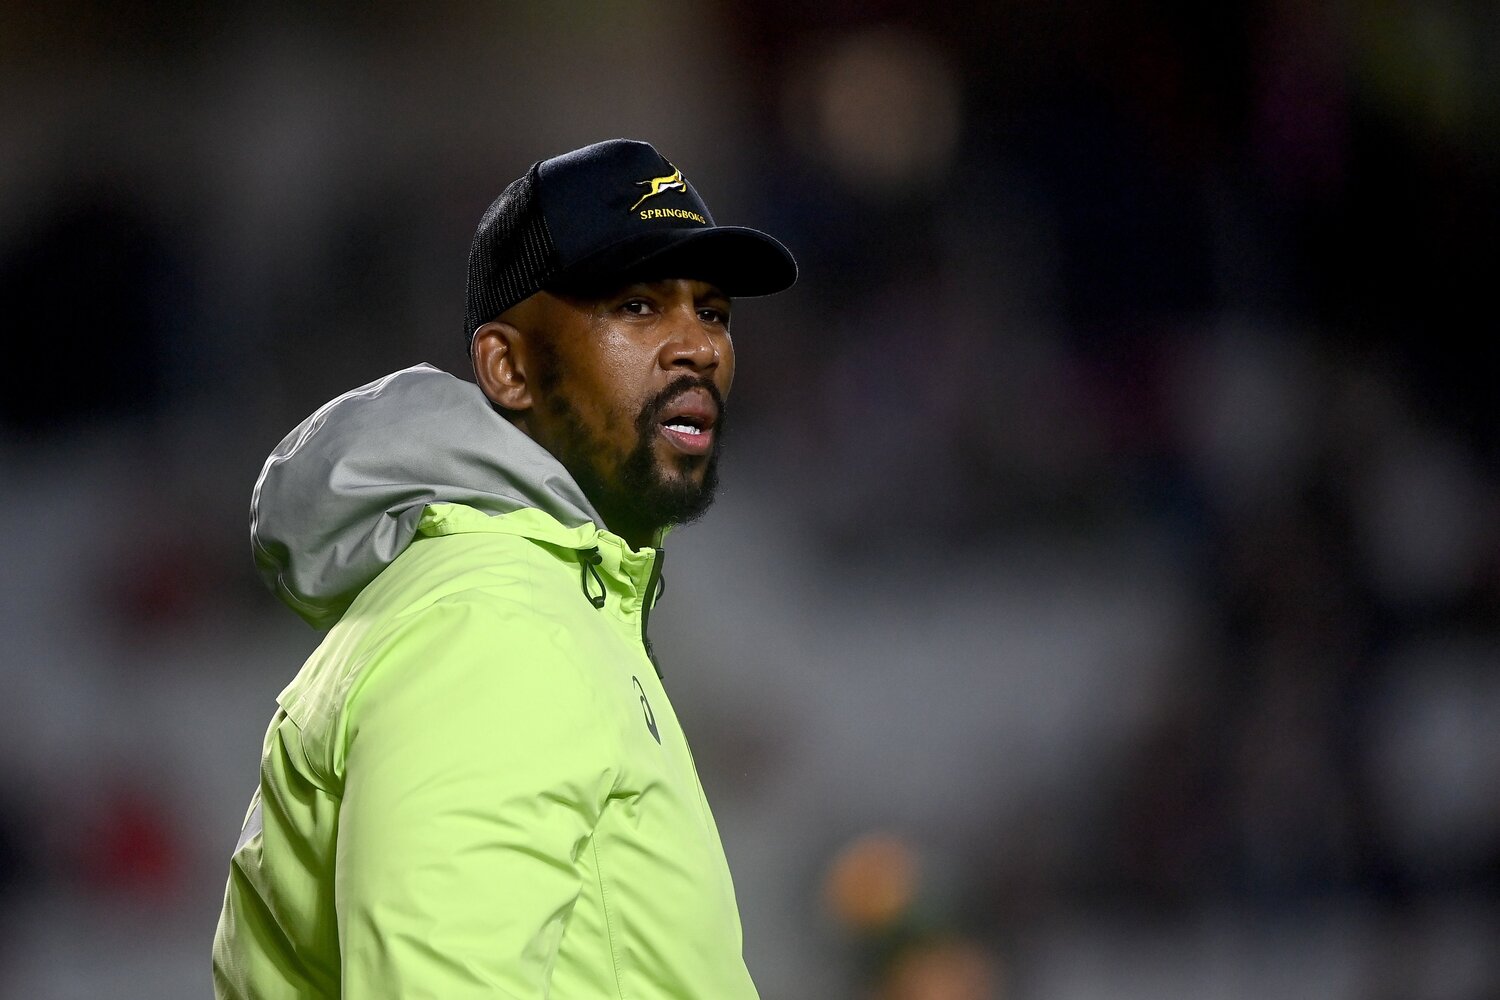 South Africa's Coach Explains Why they Want the Game Against Ireland to Be Challenging